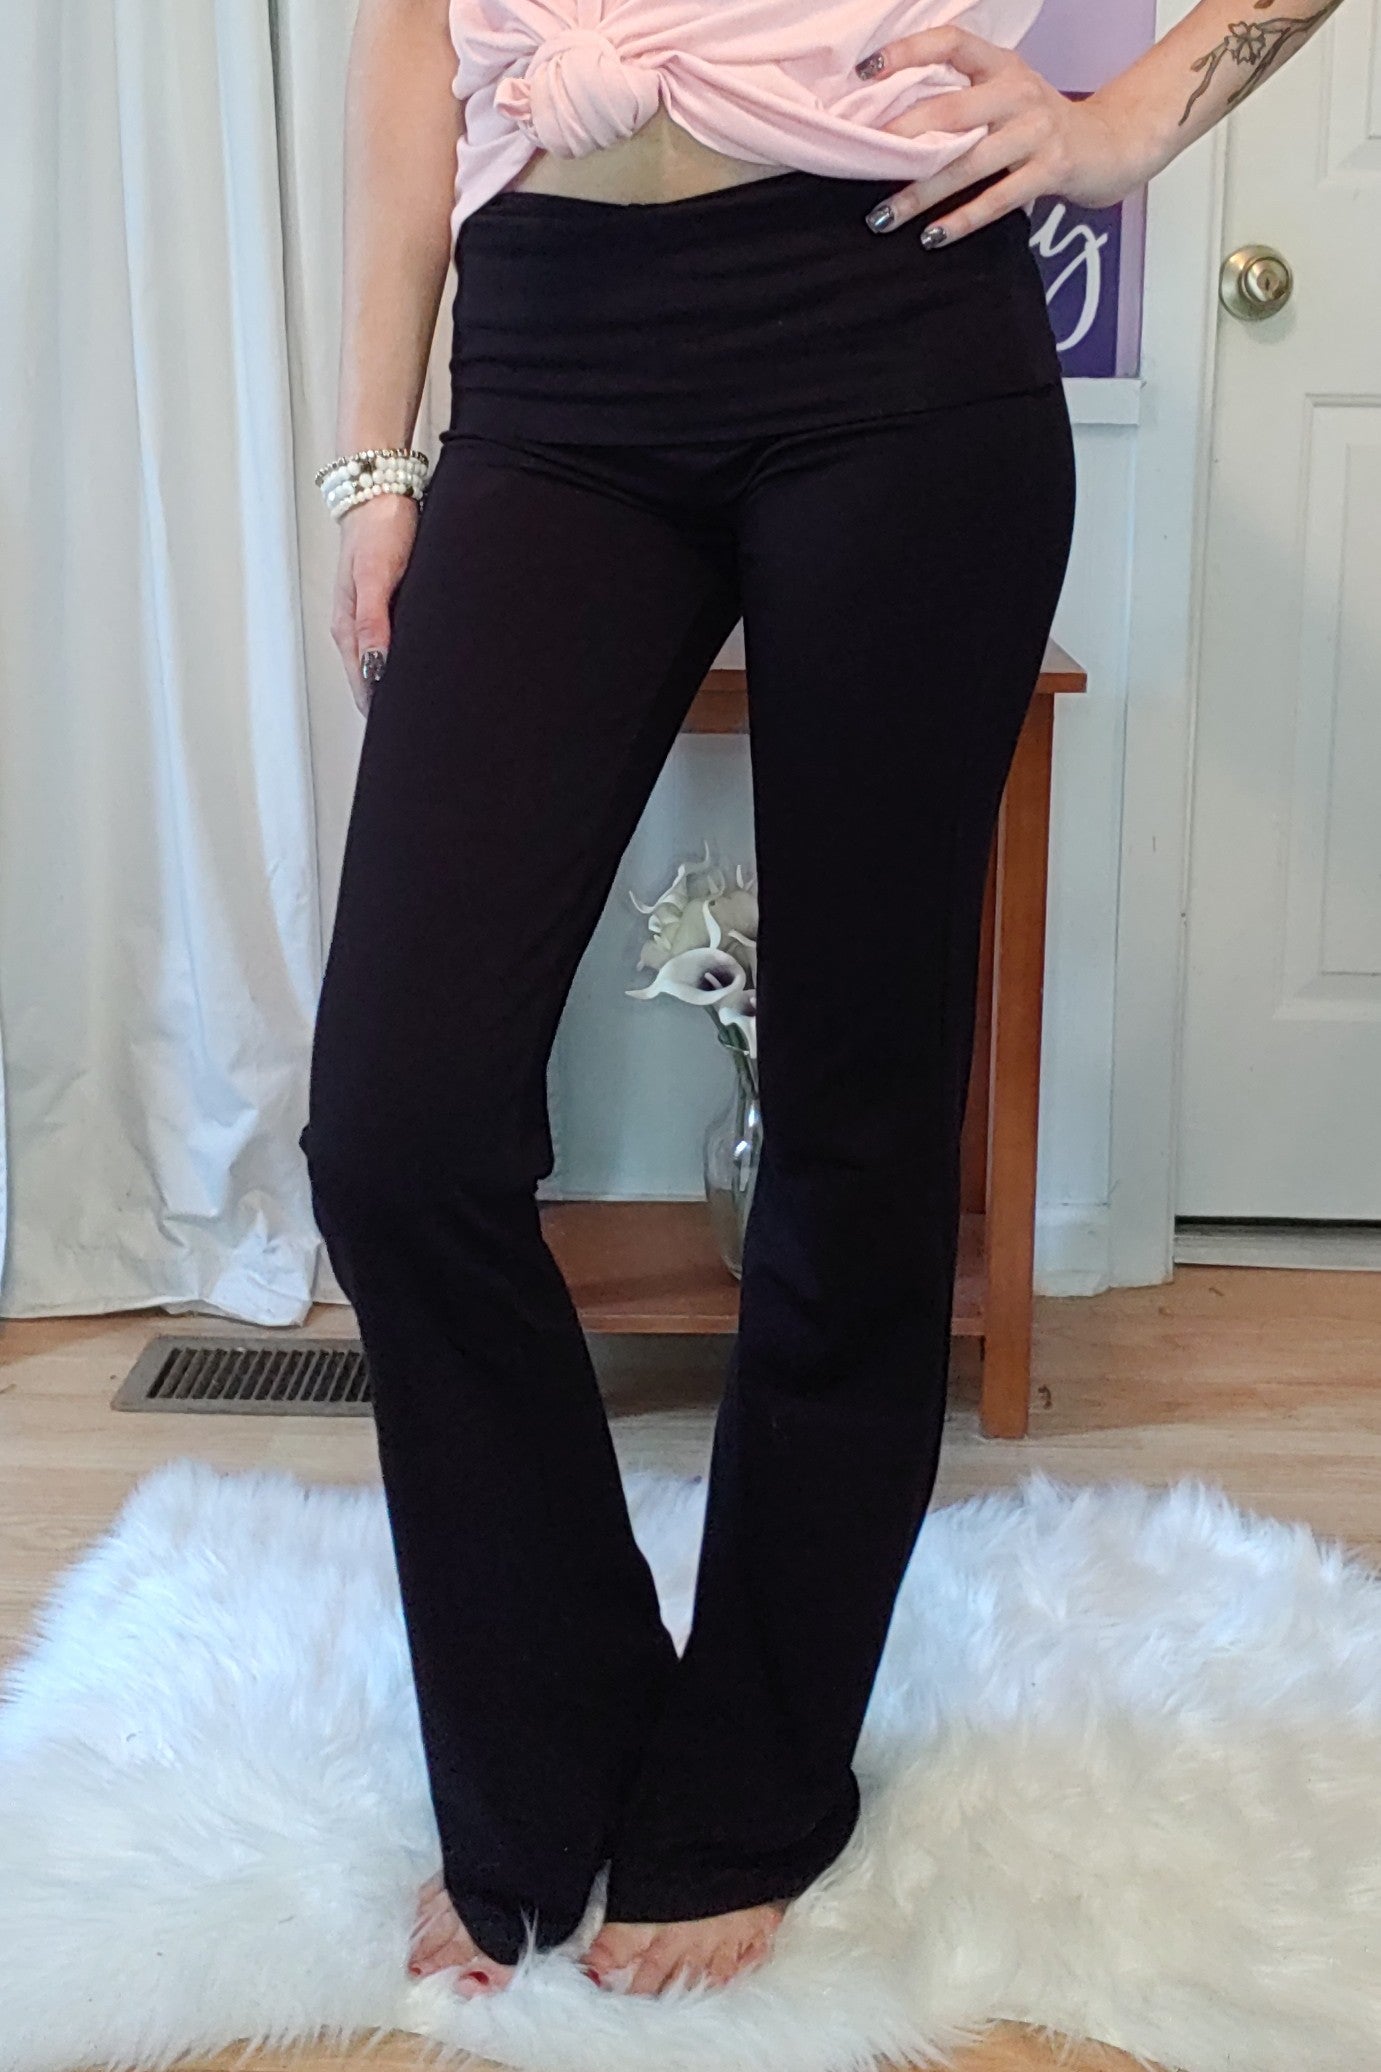 Solid Yoga Pants in Burgundy (S-XL)